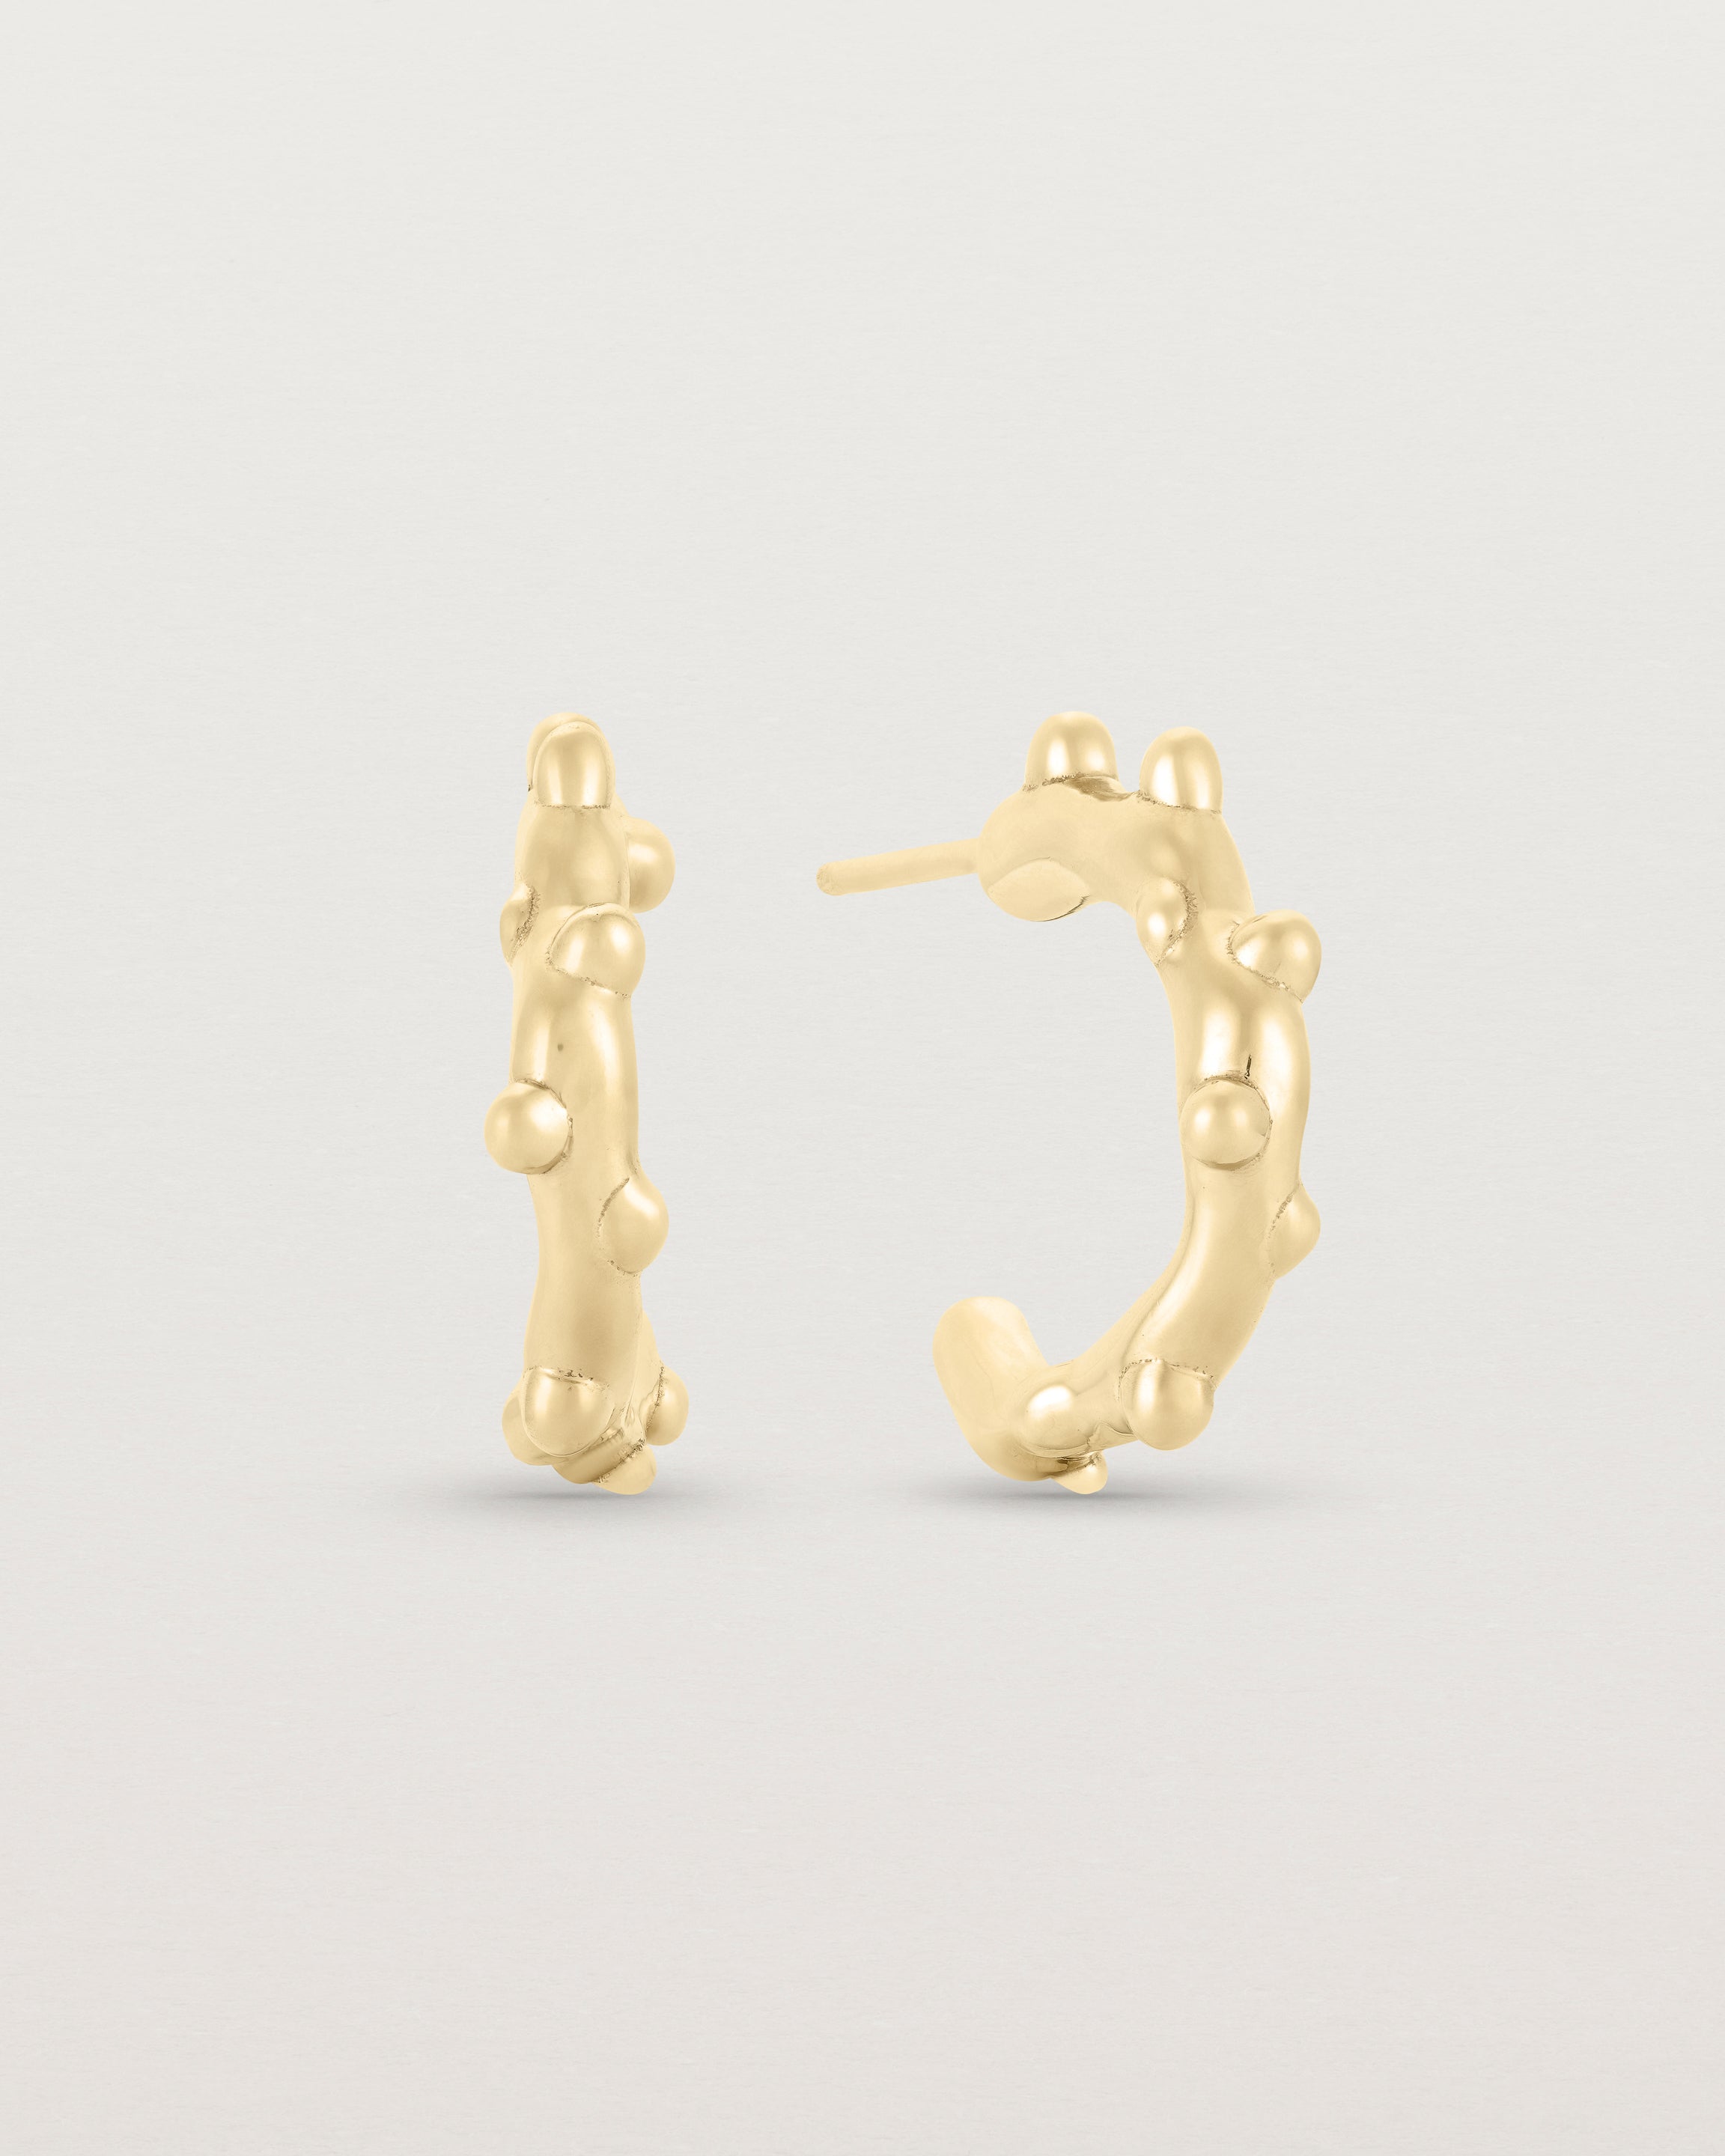 A pair of Dotted Organic Hoops | Yellow Gold.